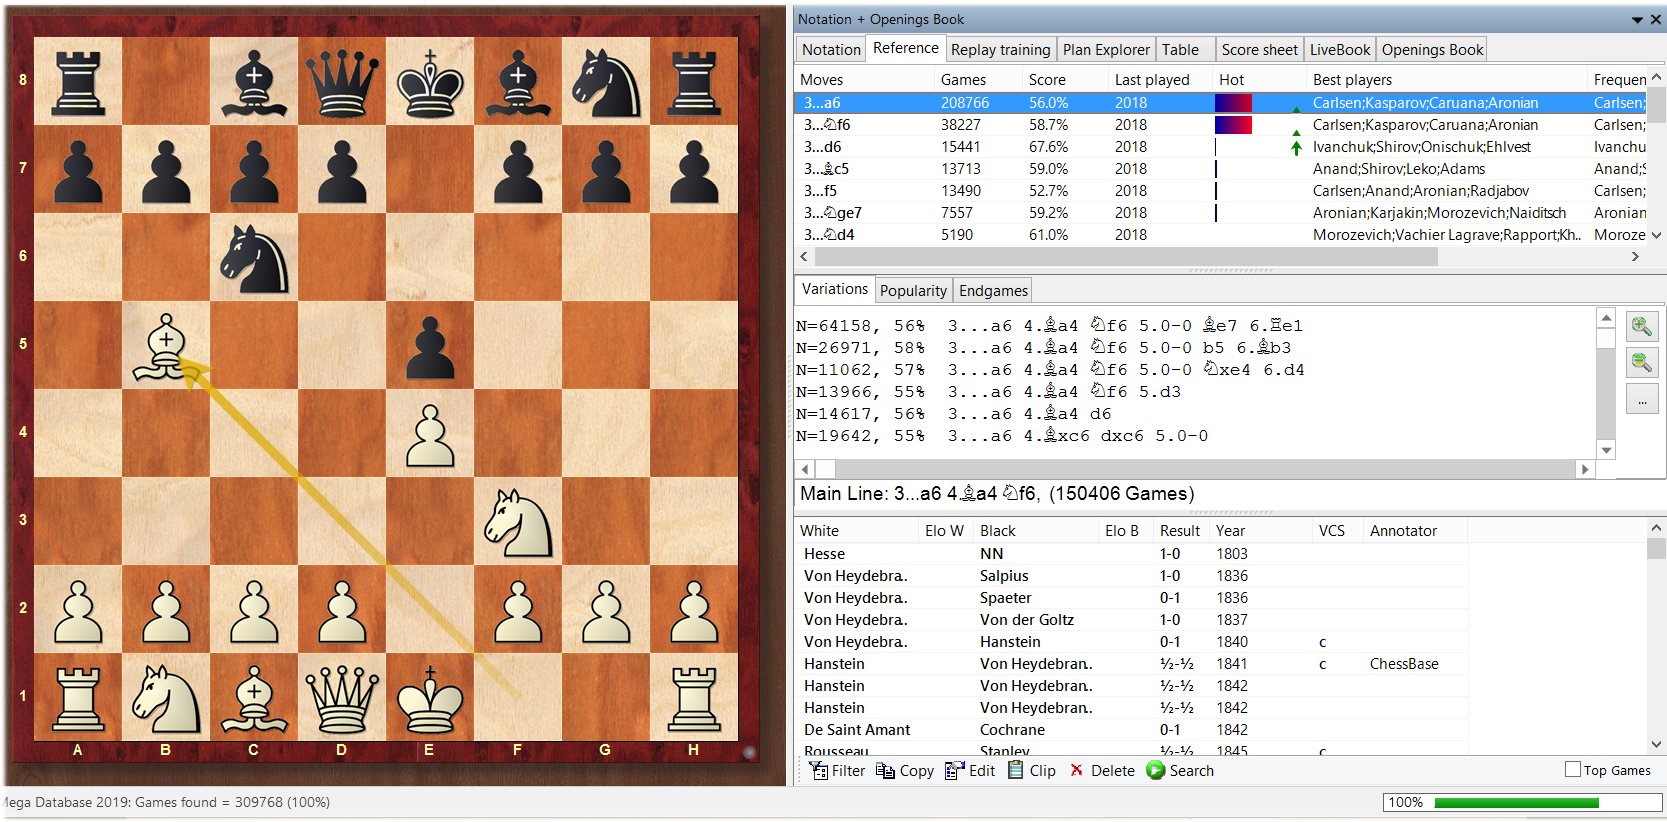 ChessBase 15: The new fast reference search